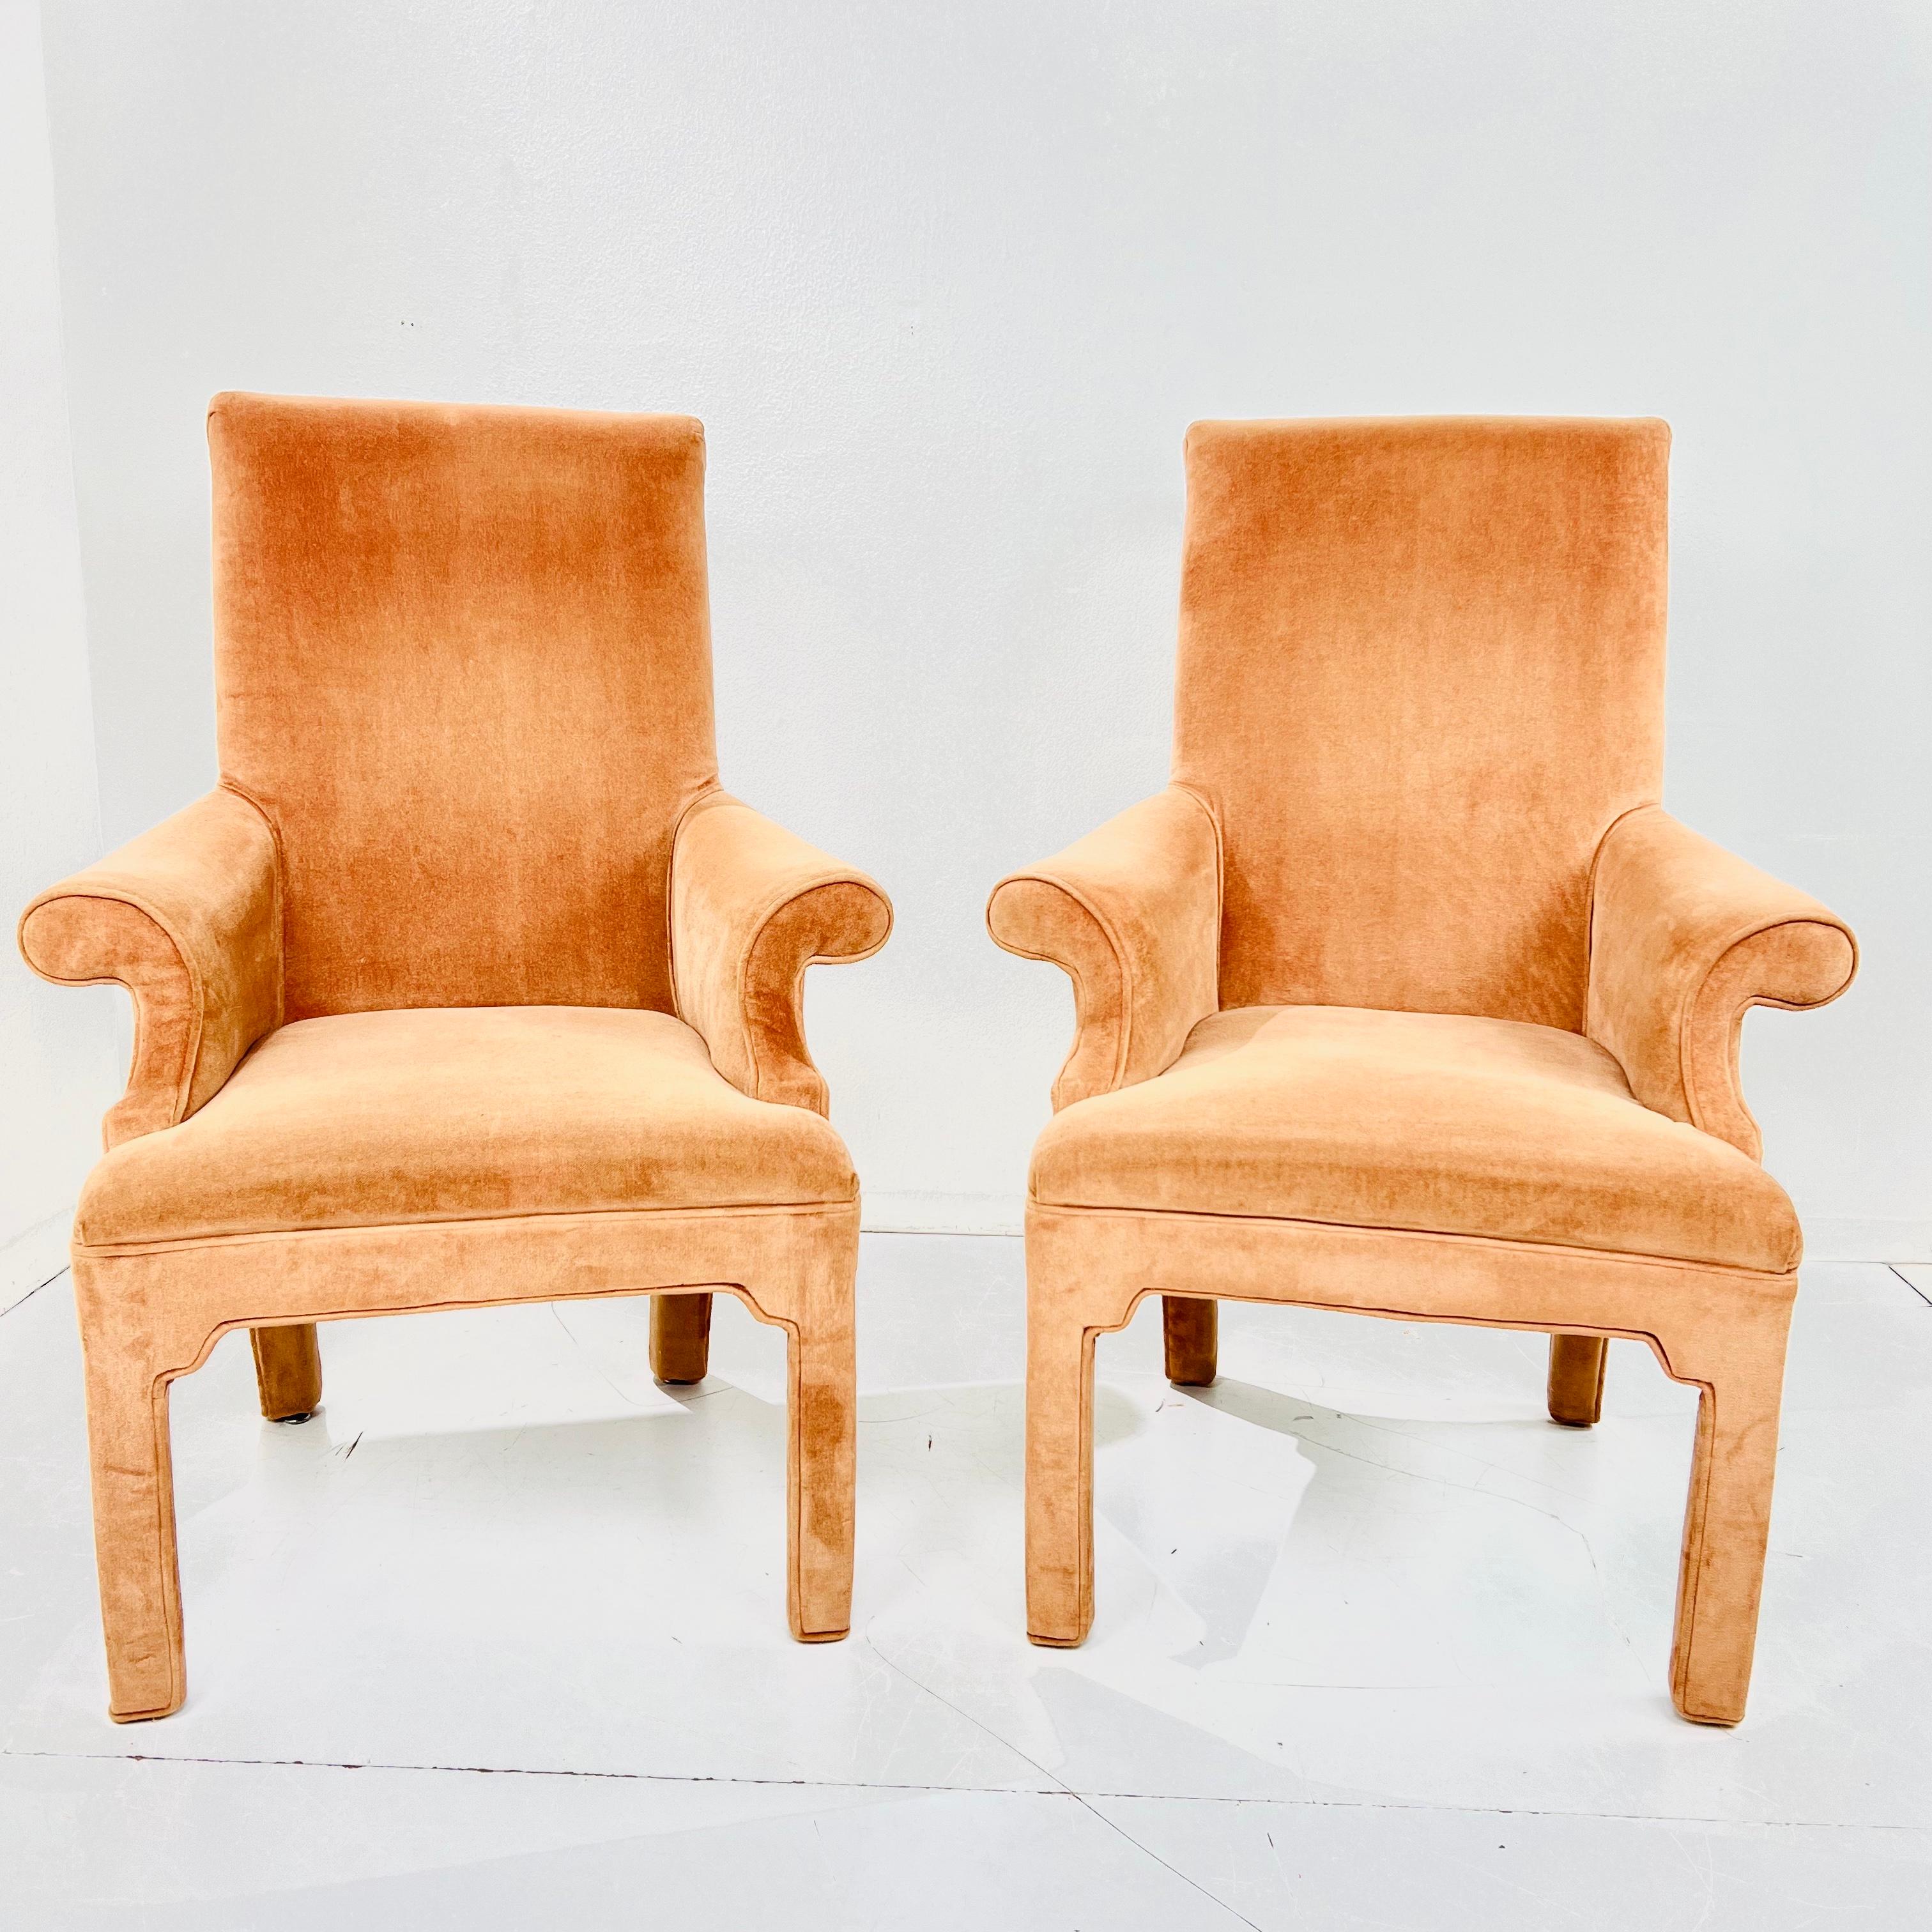 Sophisticated pair of postmodern armchairs in the style of Milo Baughman. Scrolled rollback design adds elegance, flair and movement to the simple parsons lines. 
Stool seats are padded and comfortable. Good structural condition with some minor